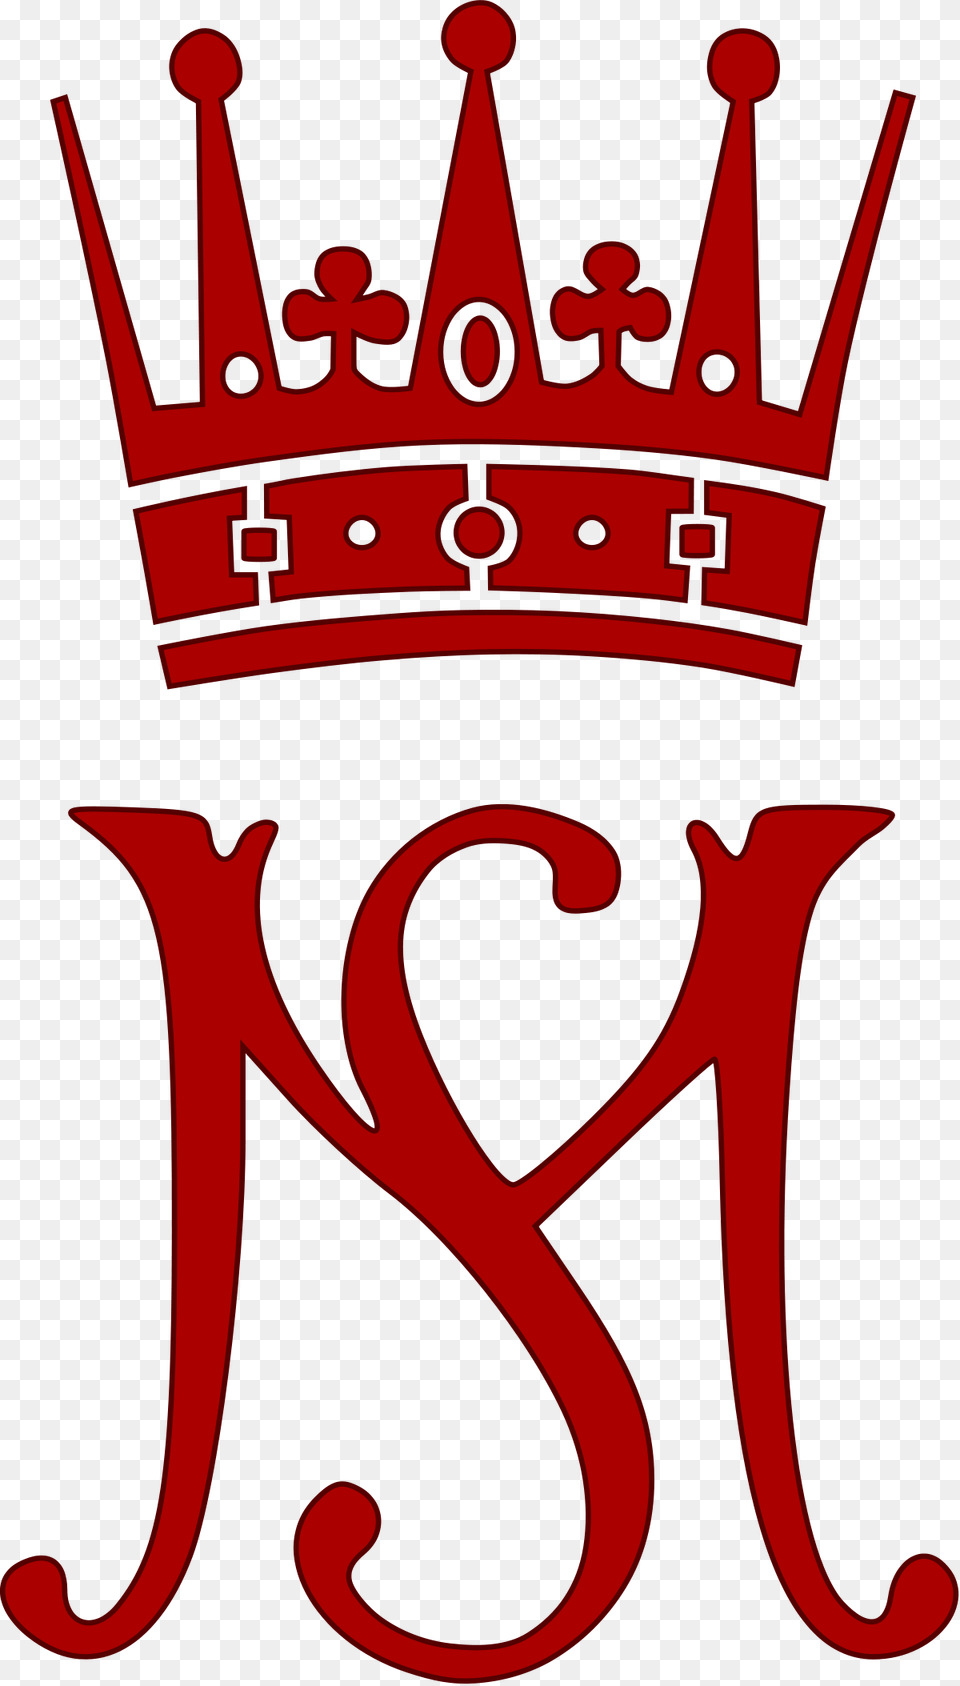 Royal Monogram Of Prince Harry, Accessories, Jewelry, Crown, Dynamite Free Transparent Png